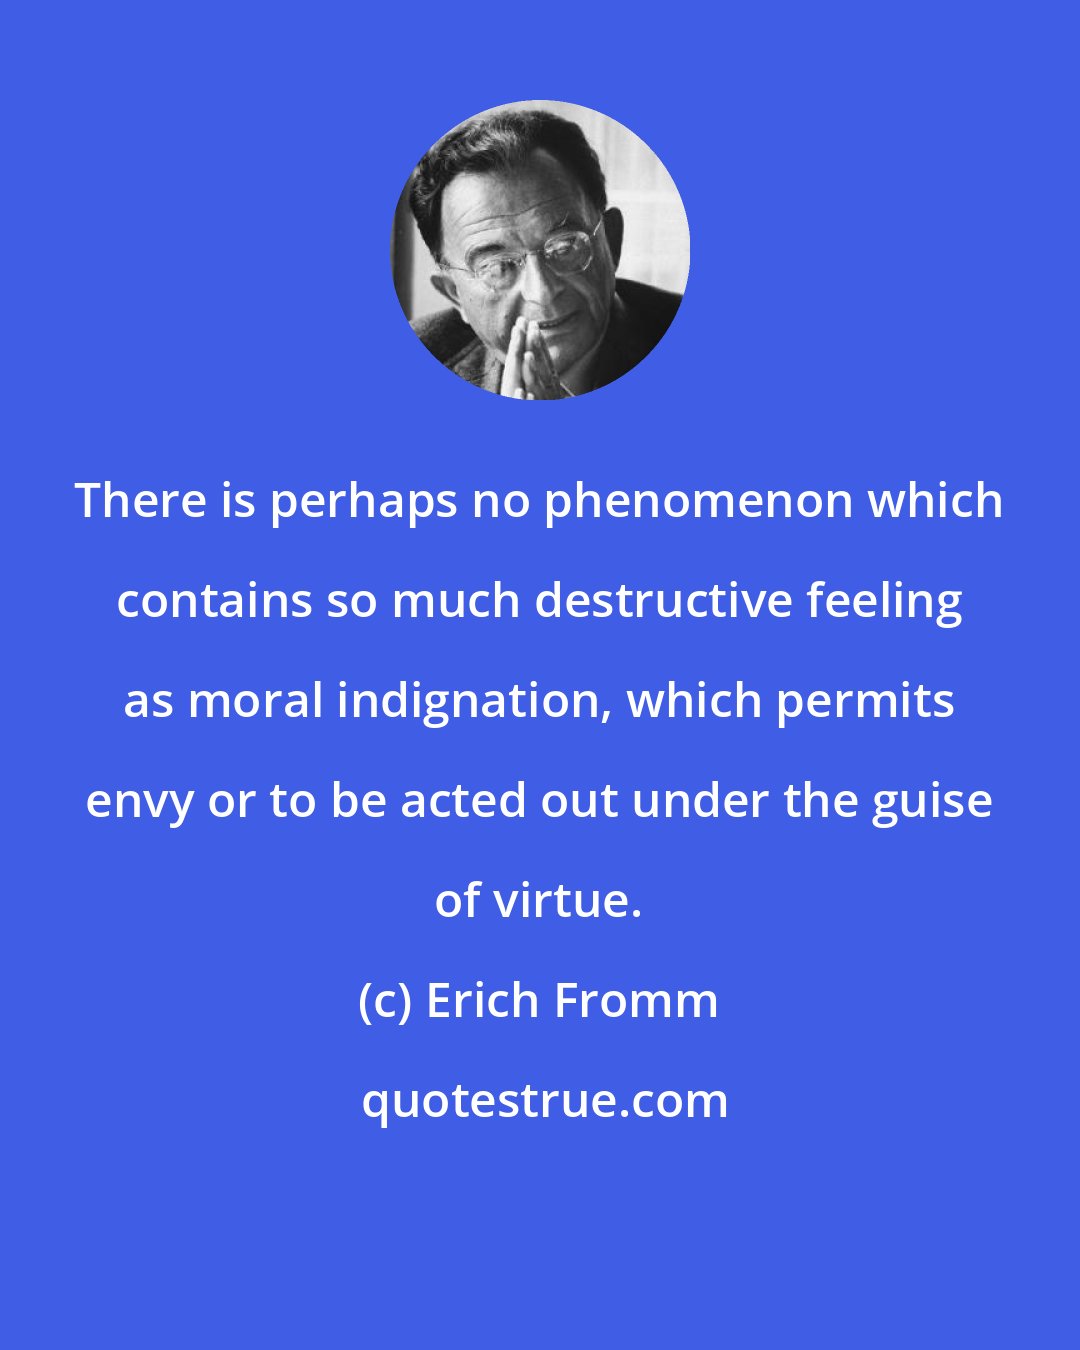 Erich Fromm: There is perhaps no phenomenon which contains so much destructive feeling as moral indignation, which permits envy or to be acted out under the guise of virtue.